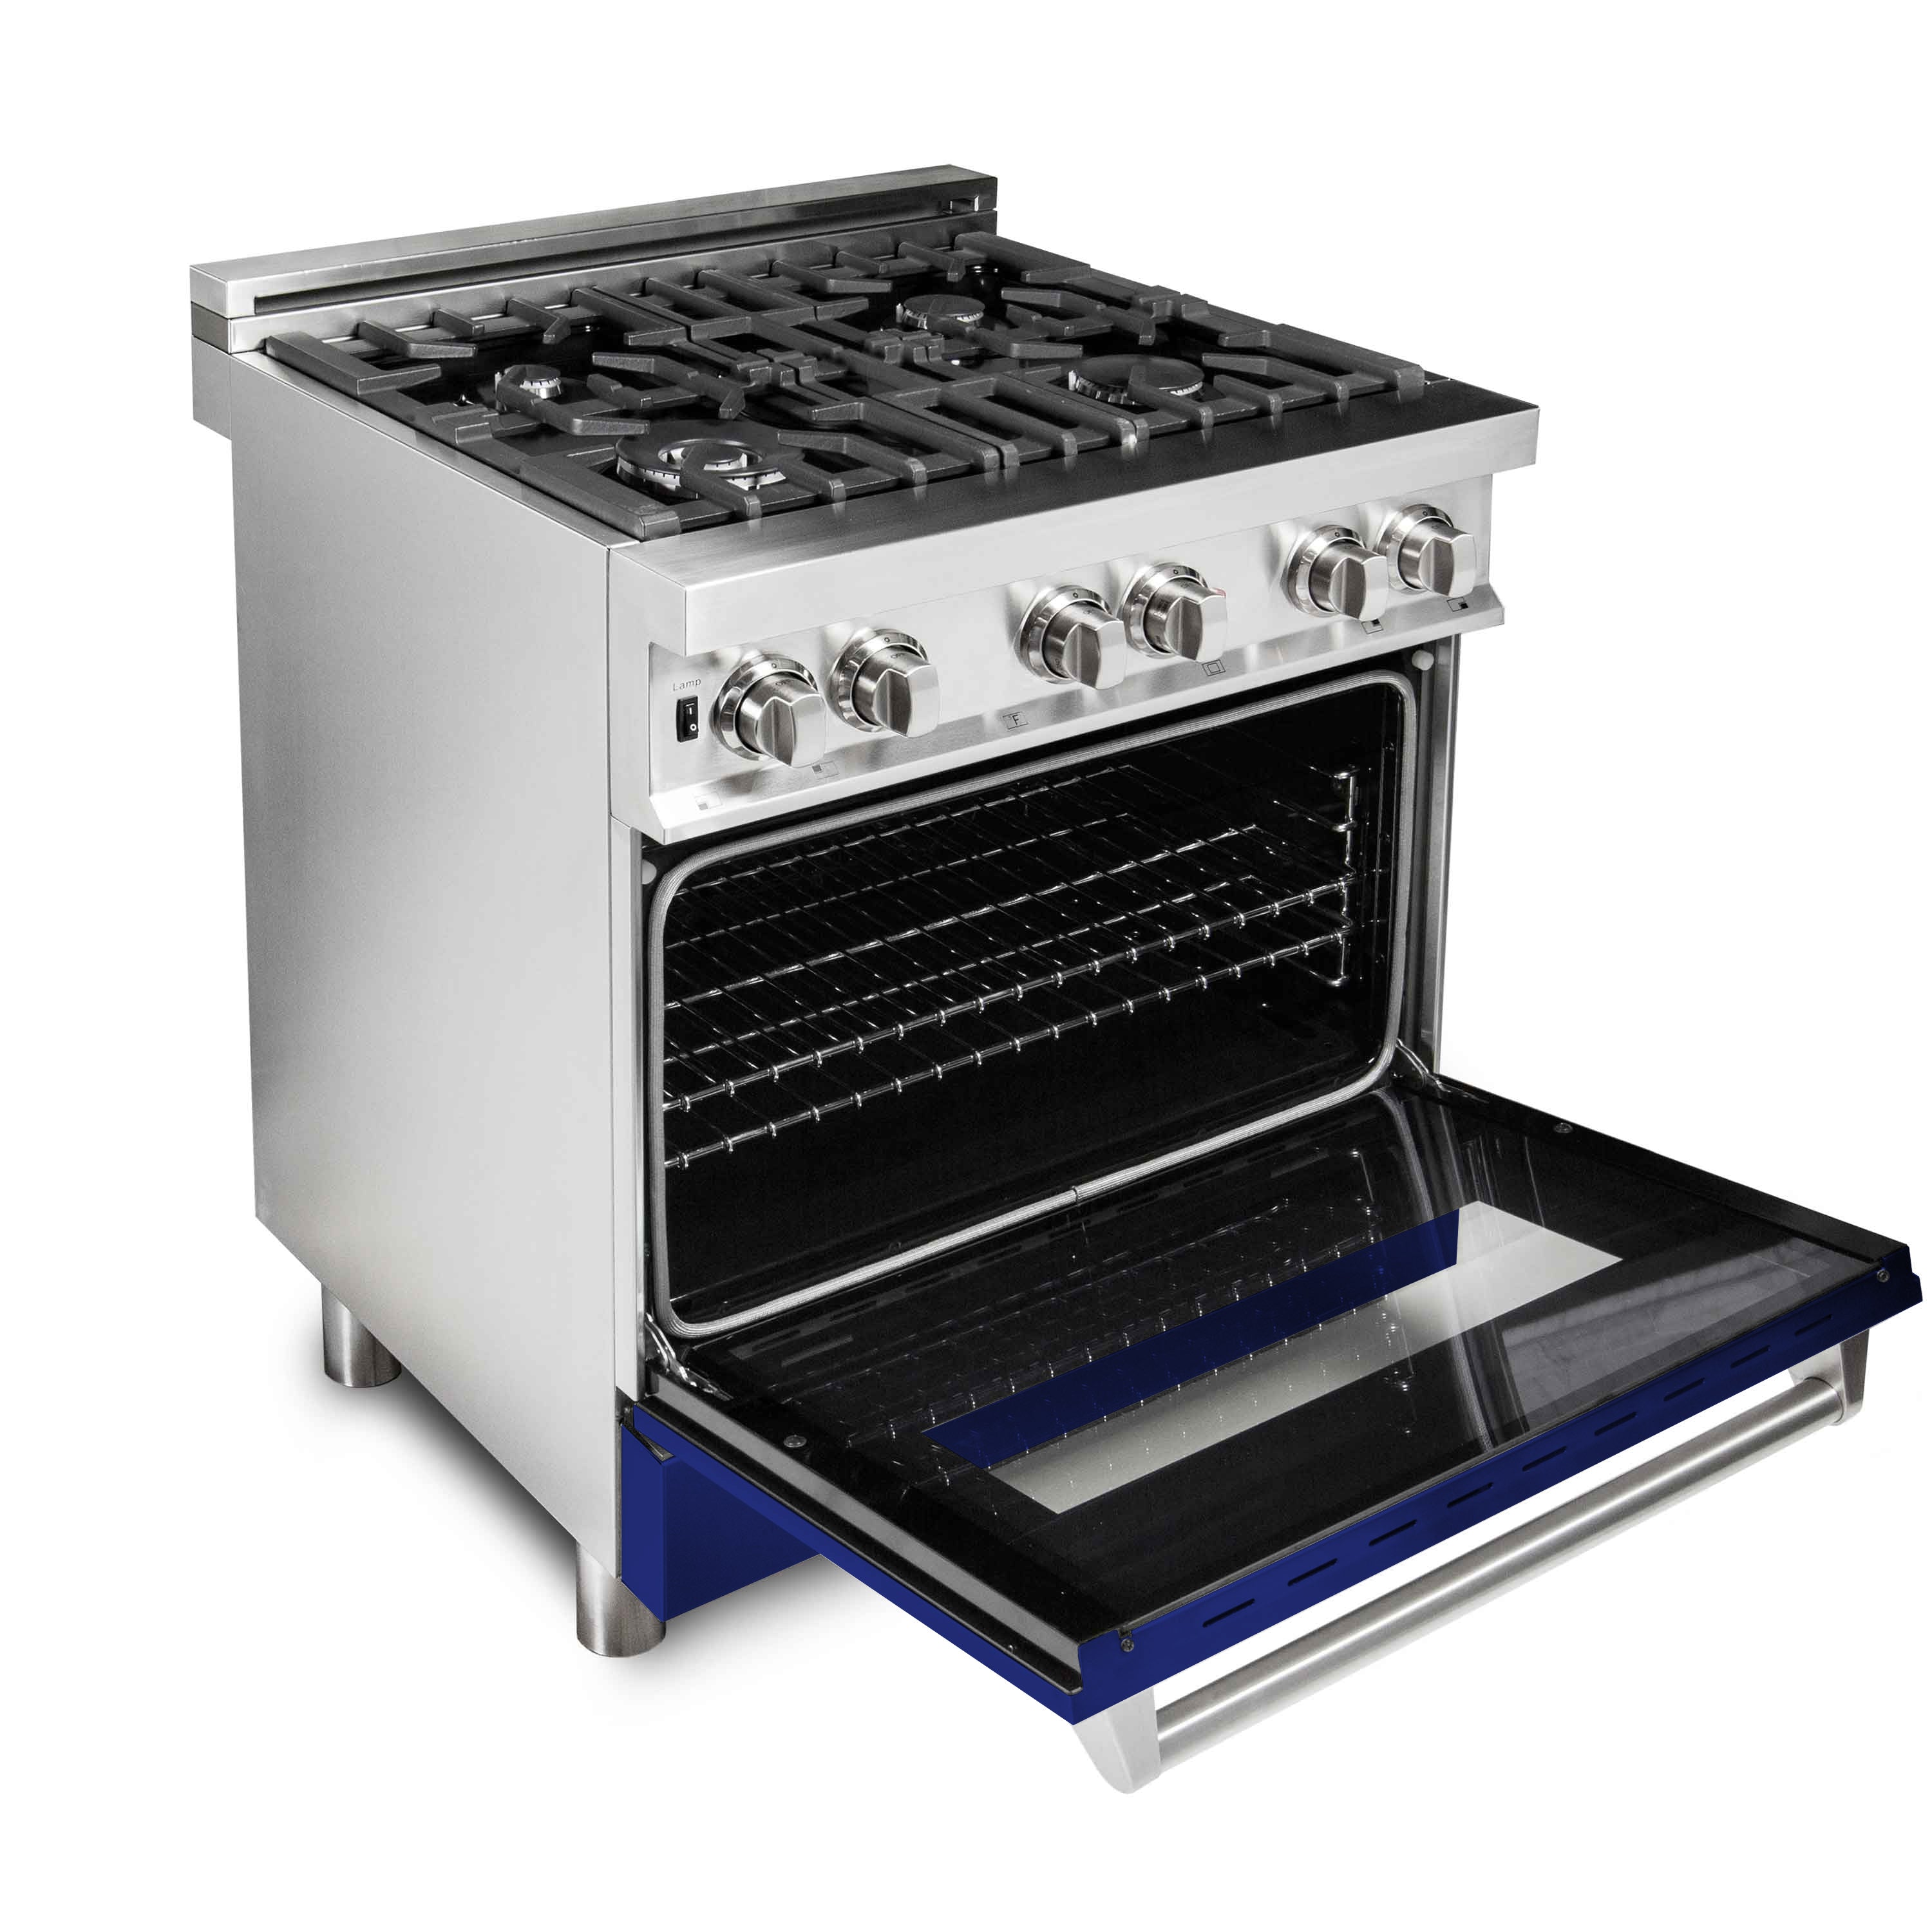 ZLINE 30" 4.0 cu. ft. Dual Fuel Range with Gas Stove and Electric Oven in Stainless Steel and Blue Gloss Door (RA-BG-30)